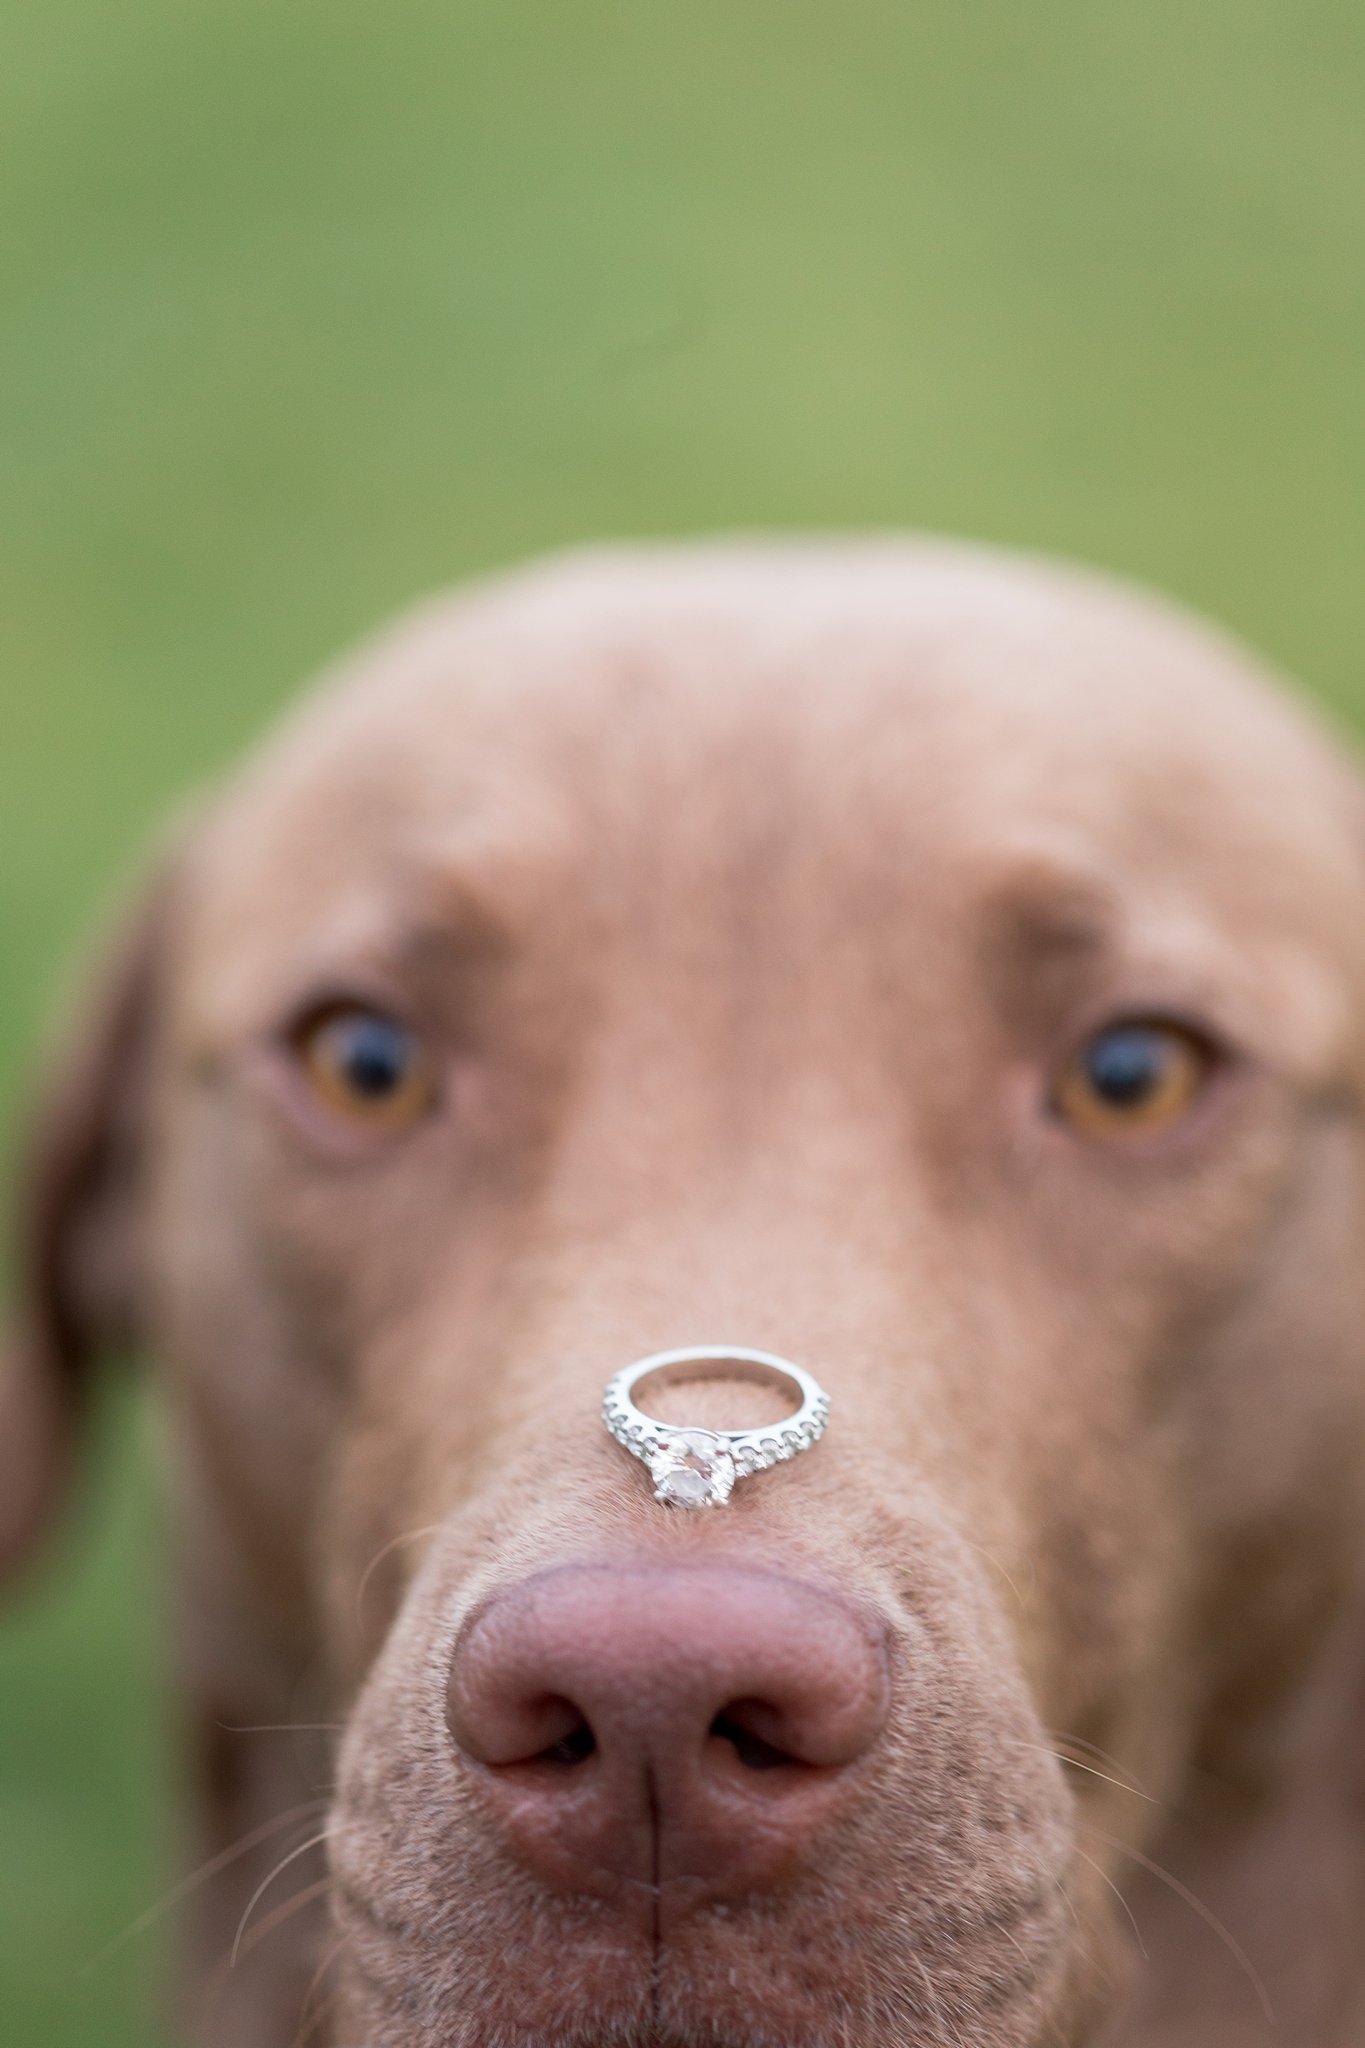 chesapeake bay retriever holding an engagement ring on its nose